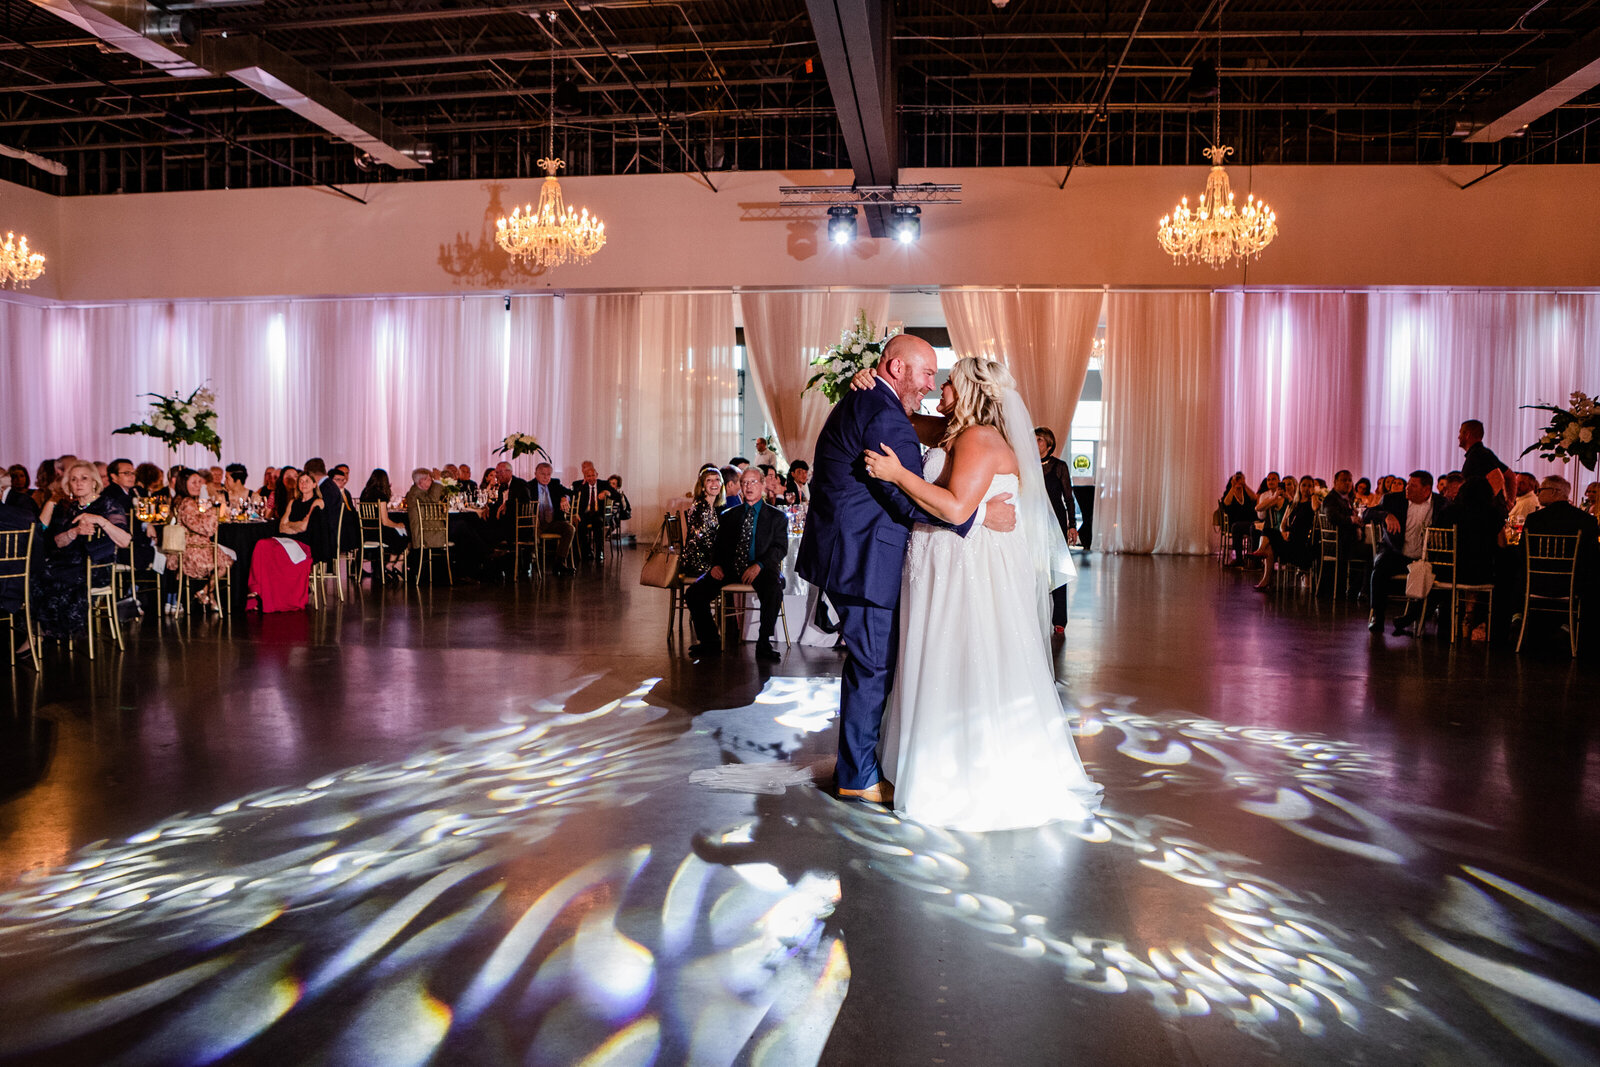 Bride and Groom 's first dance